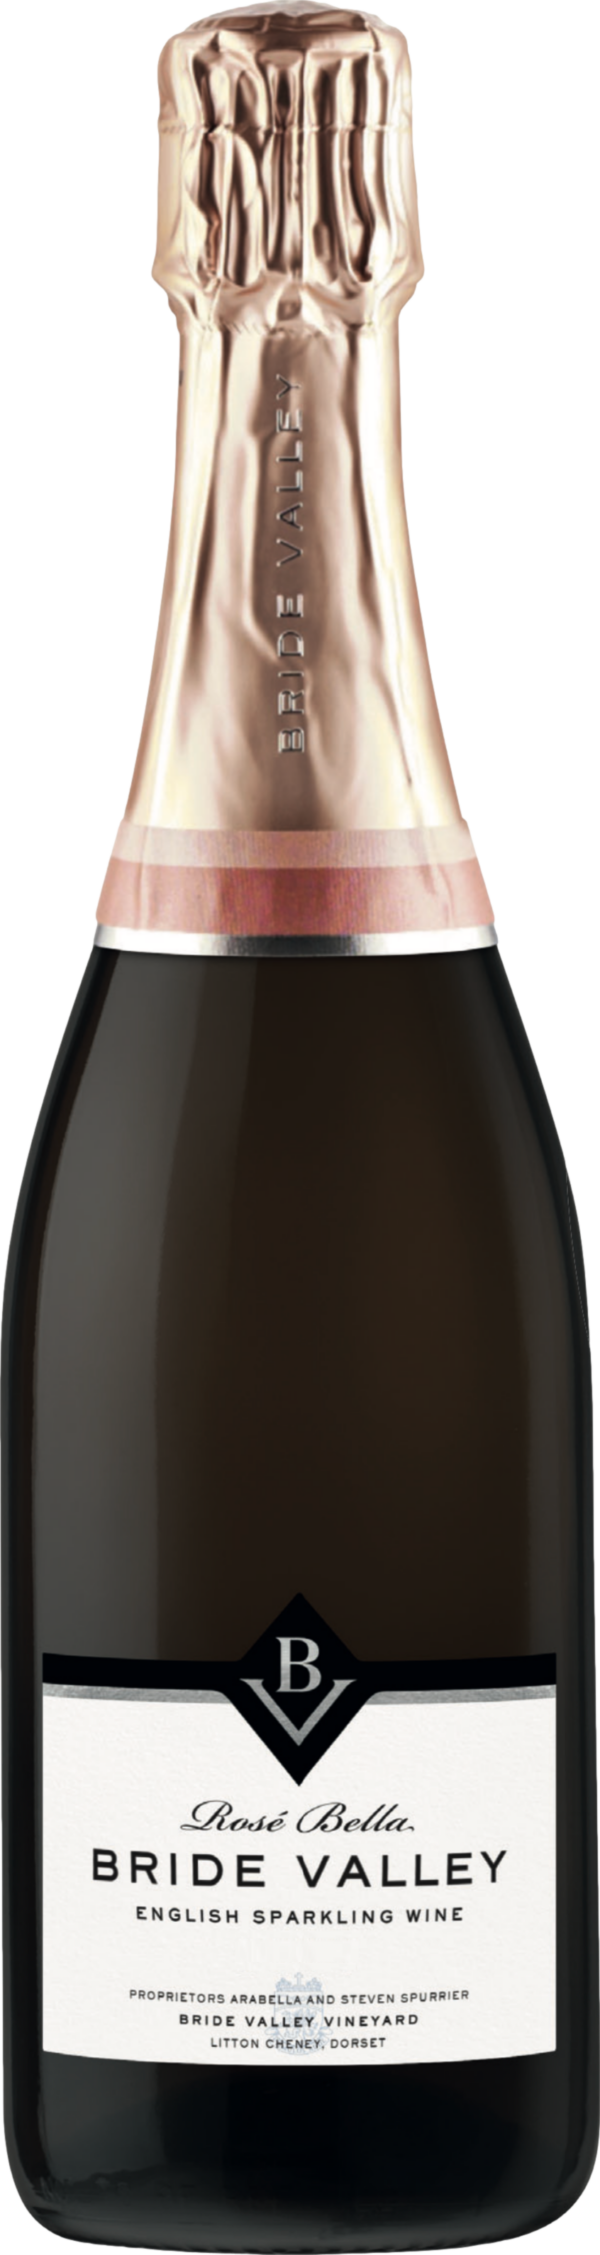 Product image of Bride Valley Rose Bella 2018 from 8wines